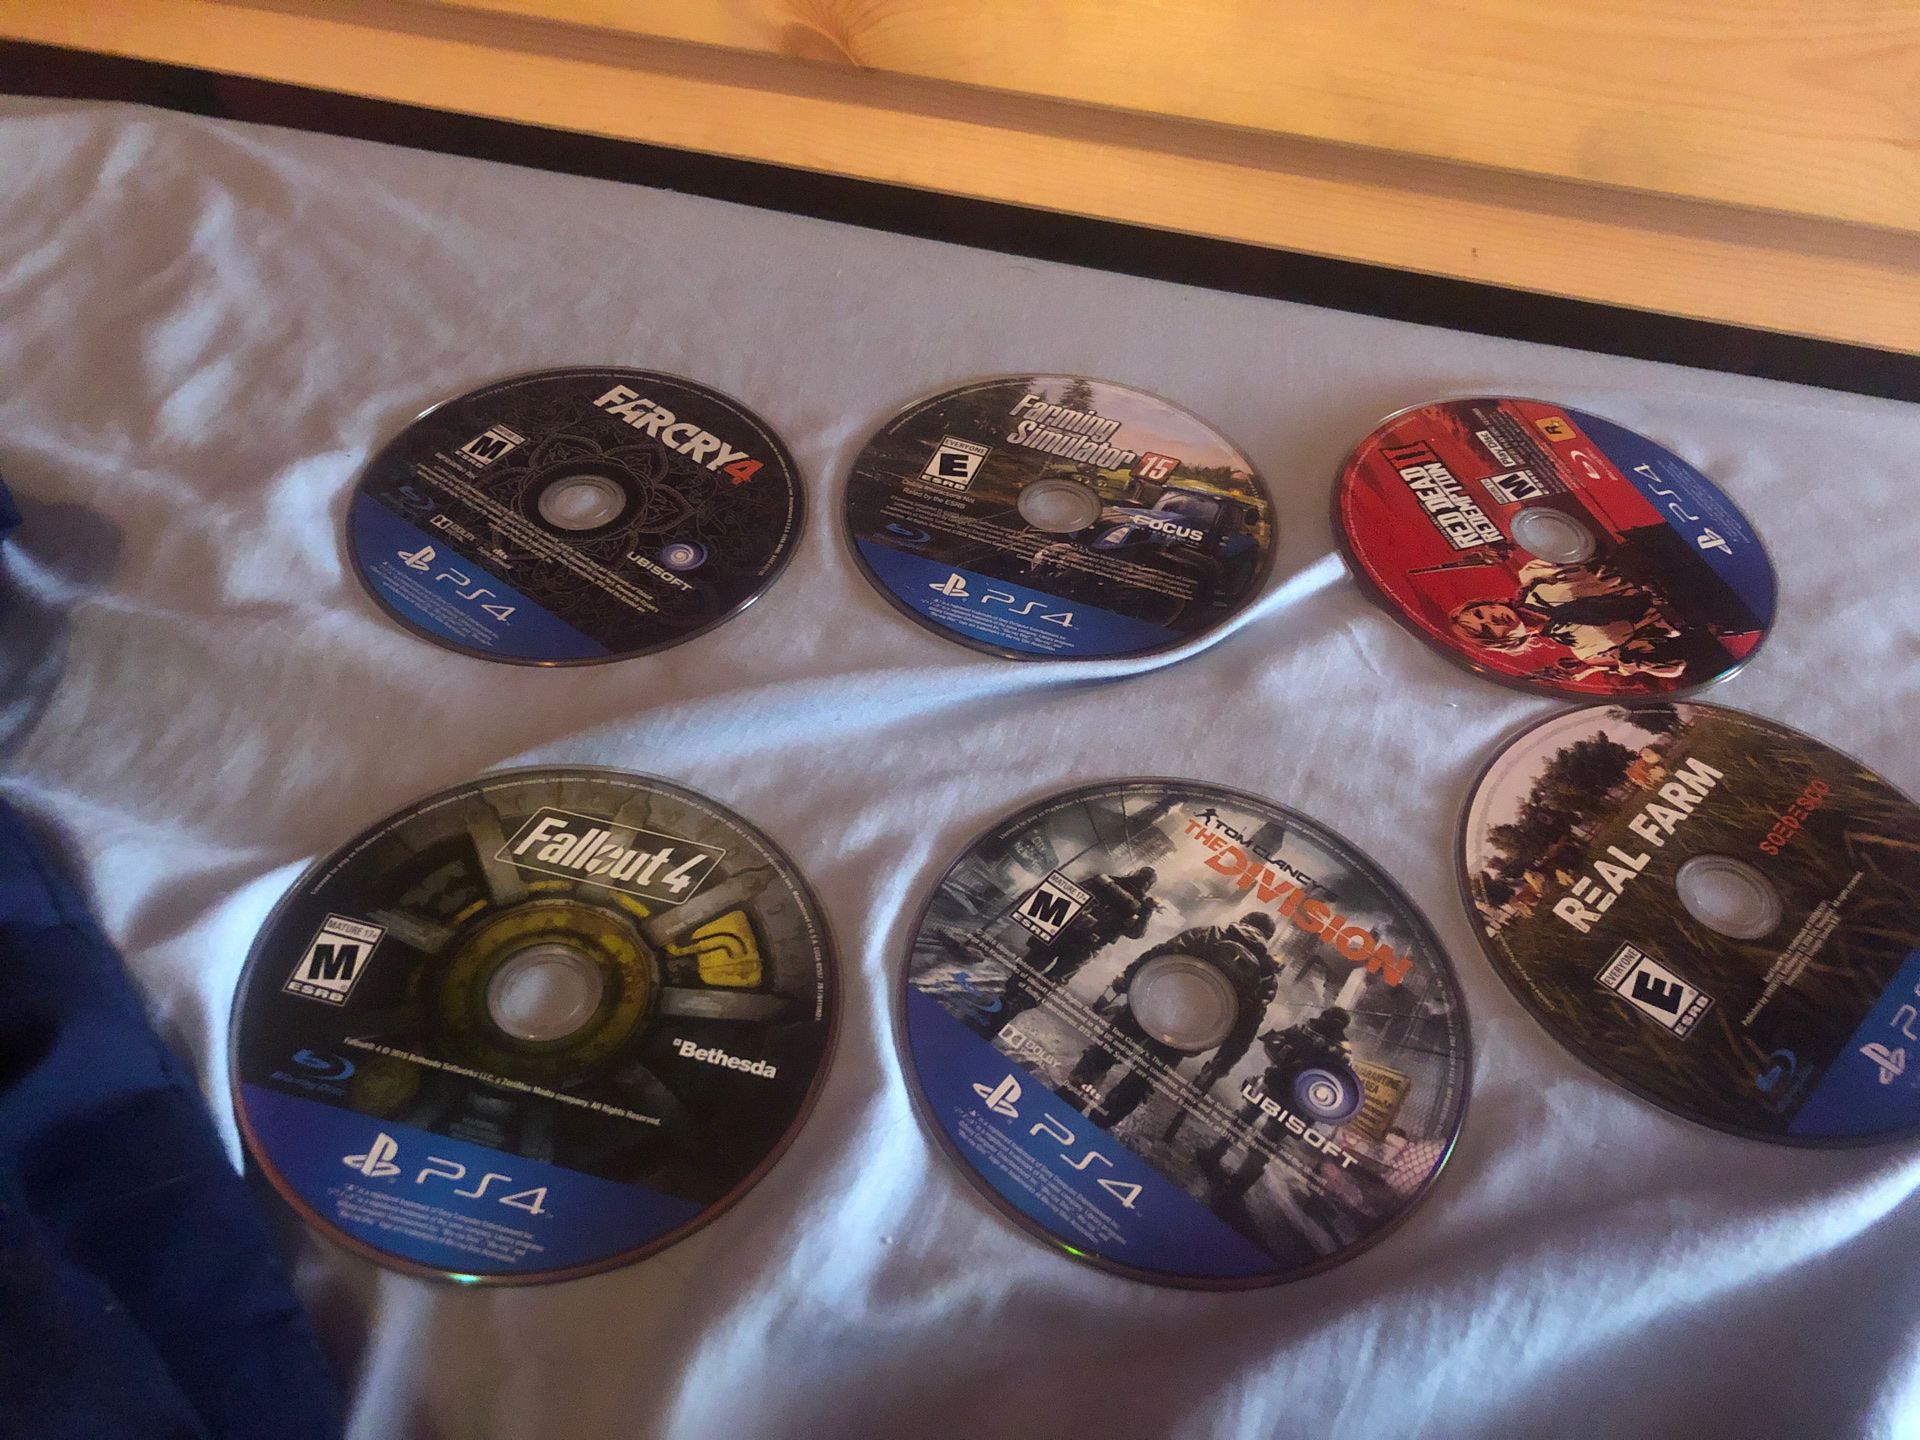 ASAP 6 New Ps4 Game Disc, like new, $15